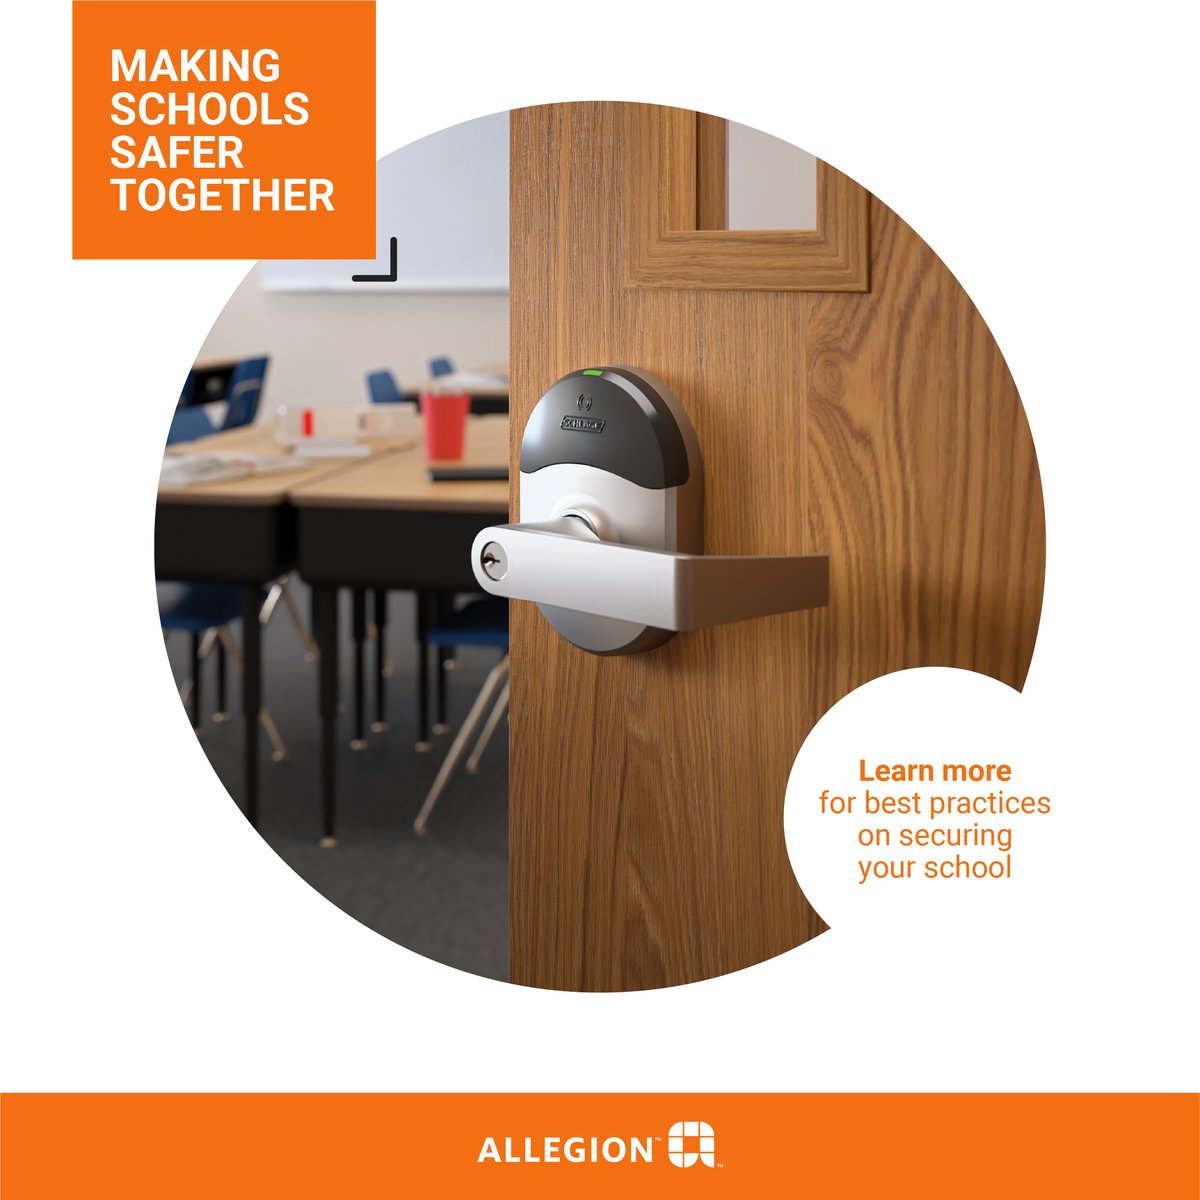 Ensuring classroom security is a top priority, and one best practice is to have doors that can be locked from inside the room. Check out this insightful article on classroom locks by @AllegionUS Ken Cook. Read ms.spr.ly/6010c4KBM

#SchoolSafety #SchoolSecurity #NASRO